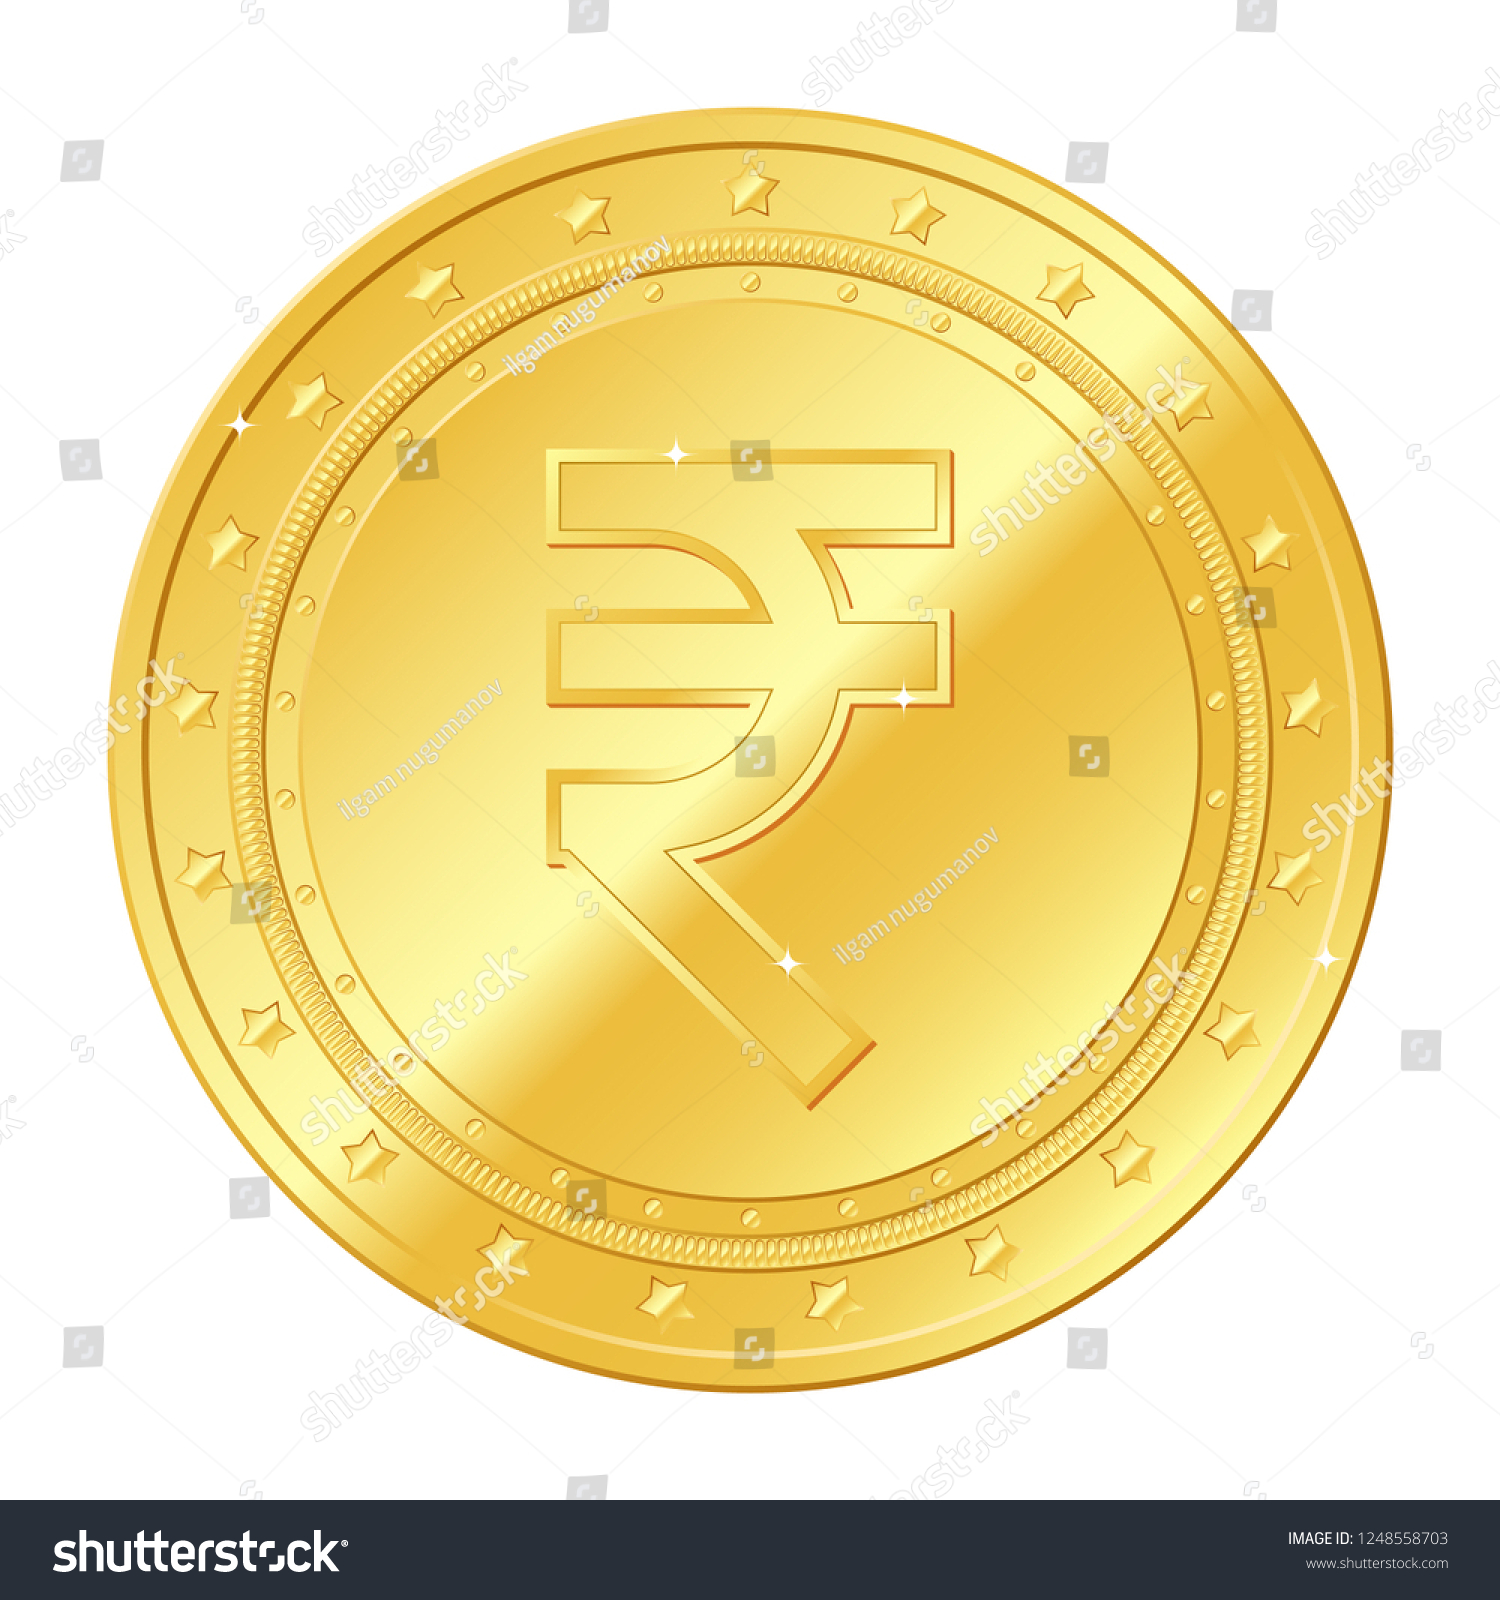 SVG of Rupee currency gold coin with stars. Indian currency. Vector illustration isolated on white background. Editable elements and glare. Suitable for casino game. Gambling. Rich EPS 10 svg